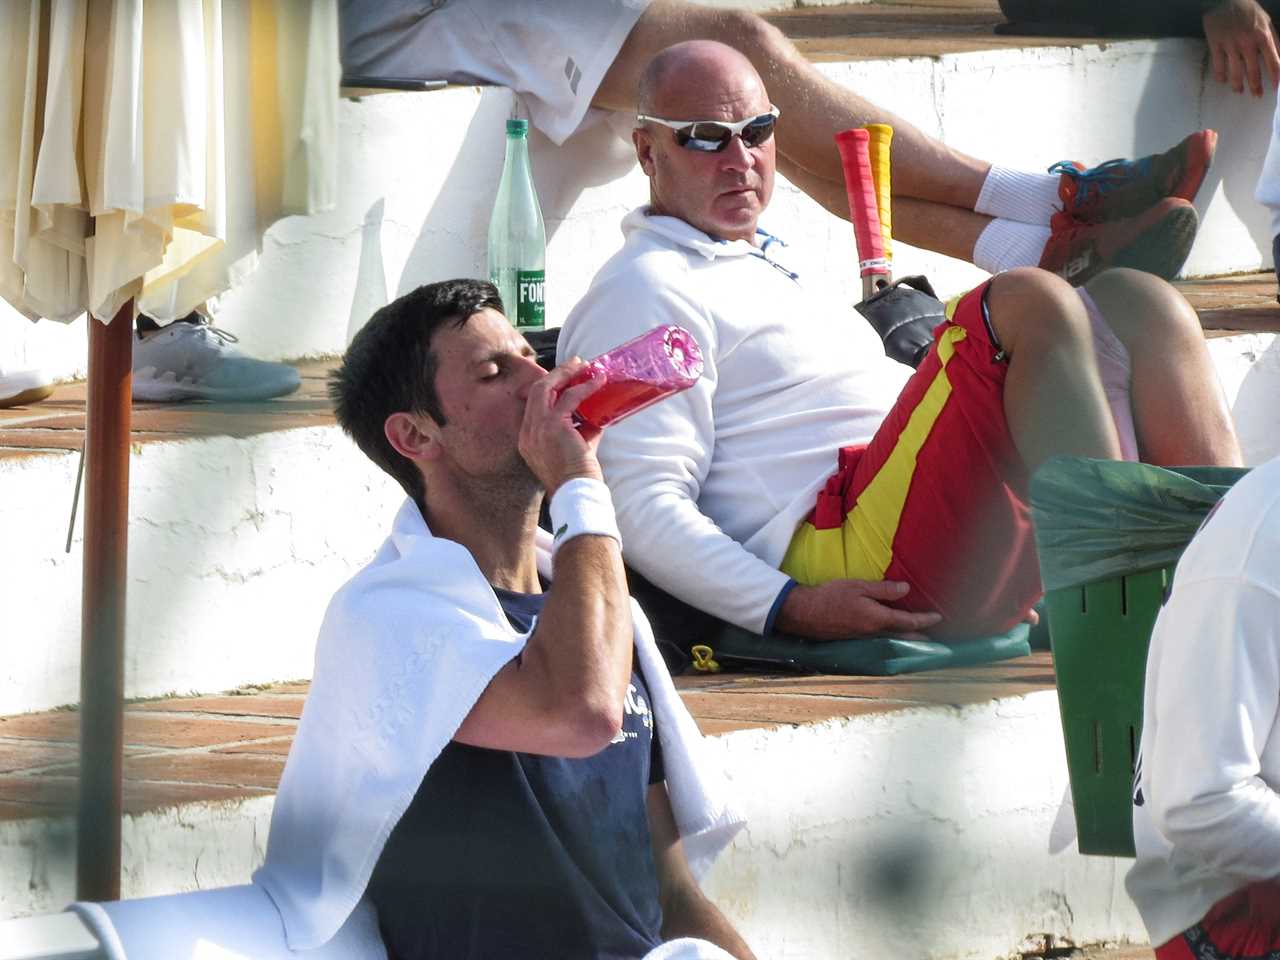 Mystery over how Novak Djokovic got into Spain before Oz trip as video shows him training in Marbella